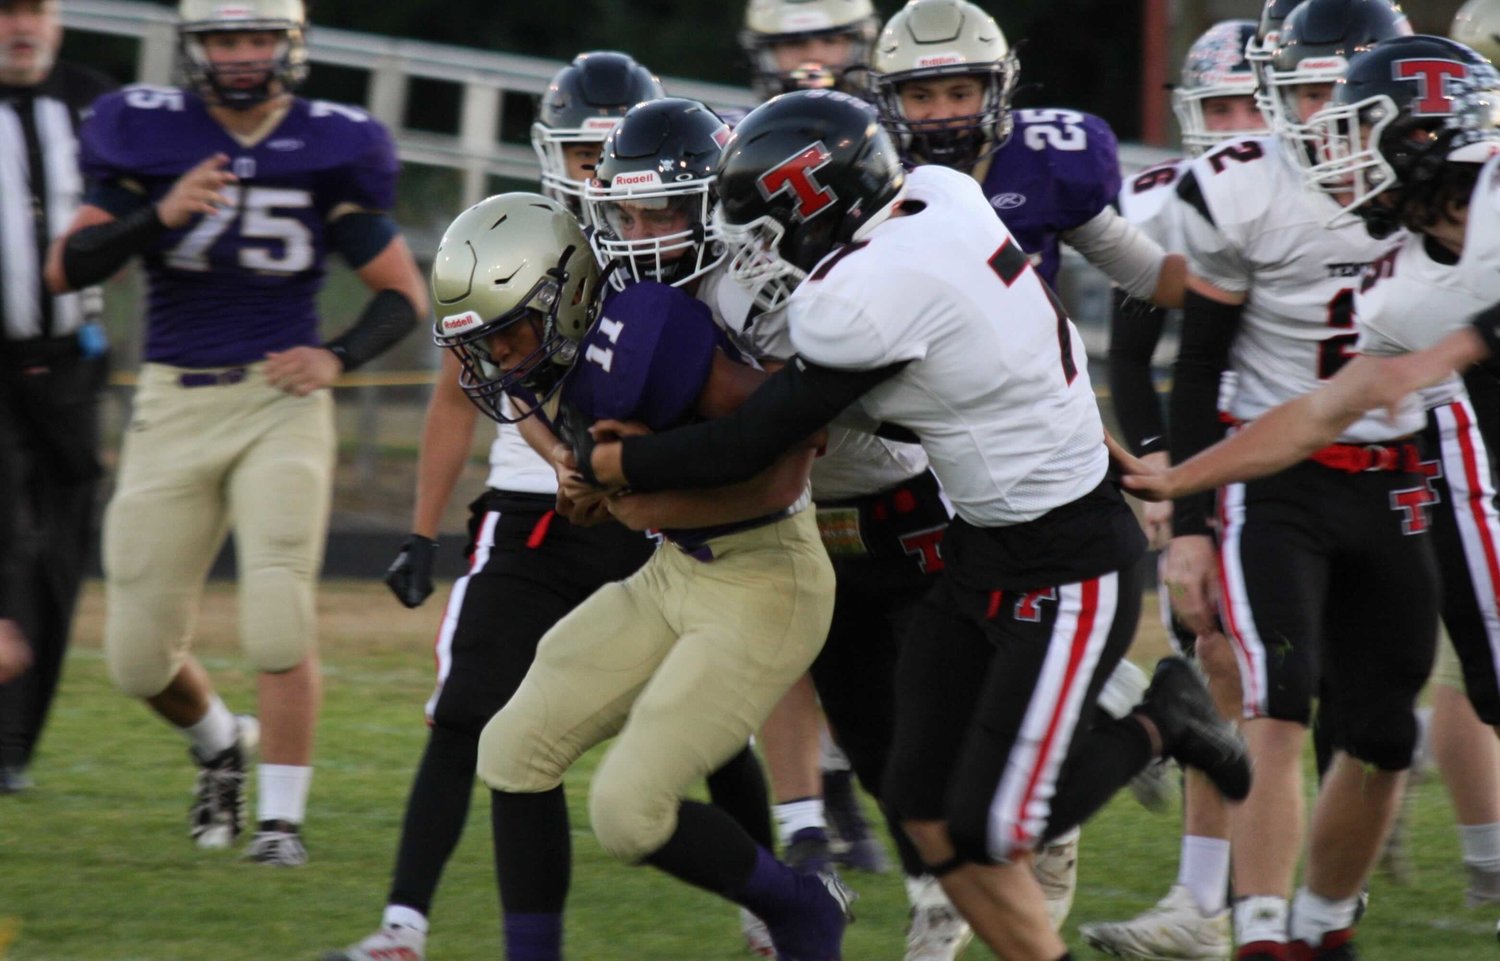 Tenino's Kysen Knox gets to Onalaska's Rodrigo Rodriguez for a stop during the Beavers' 40-6 win over the Loggers in Onalaska on Sept. 23.